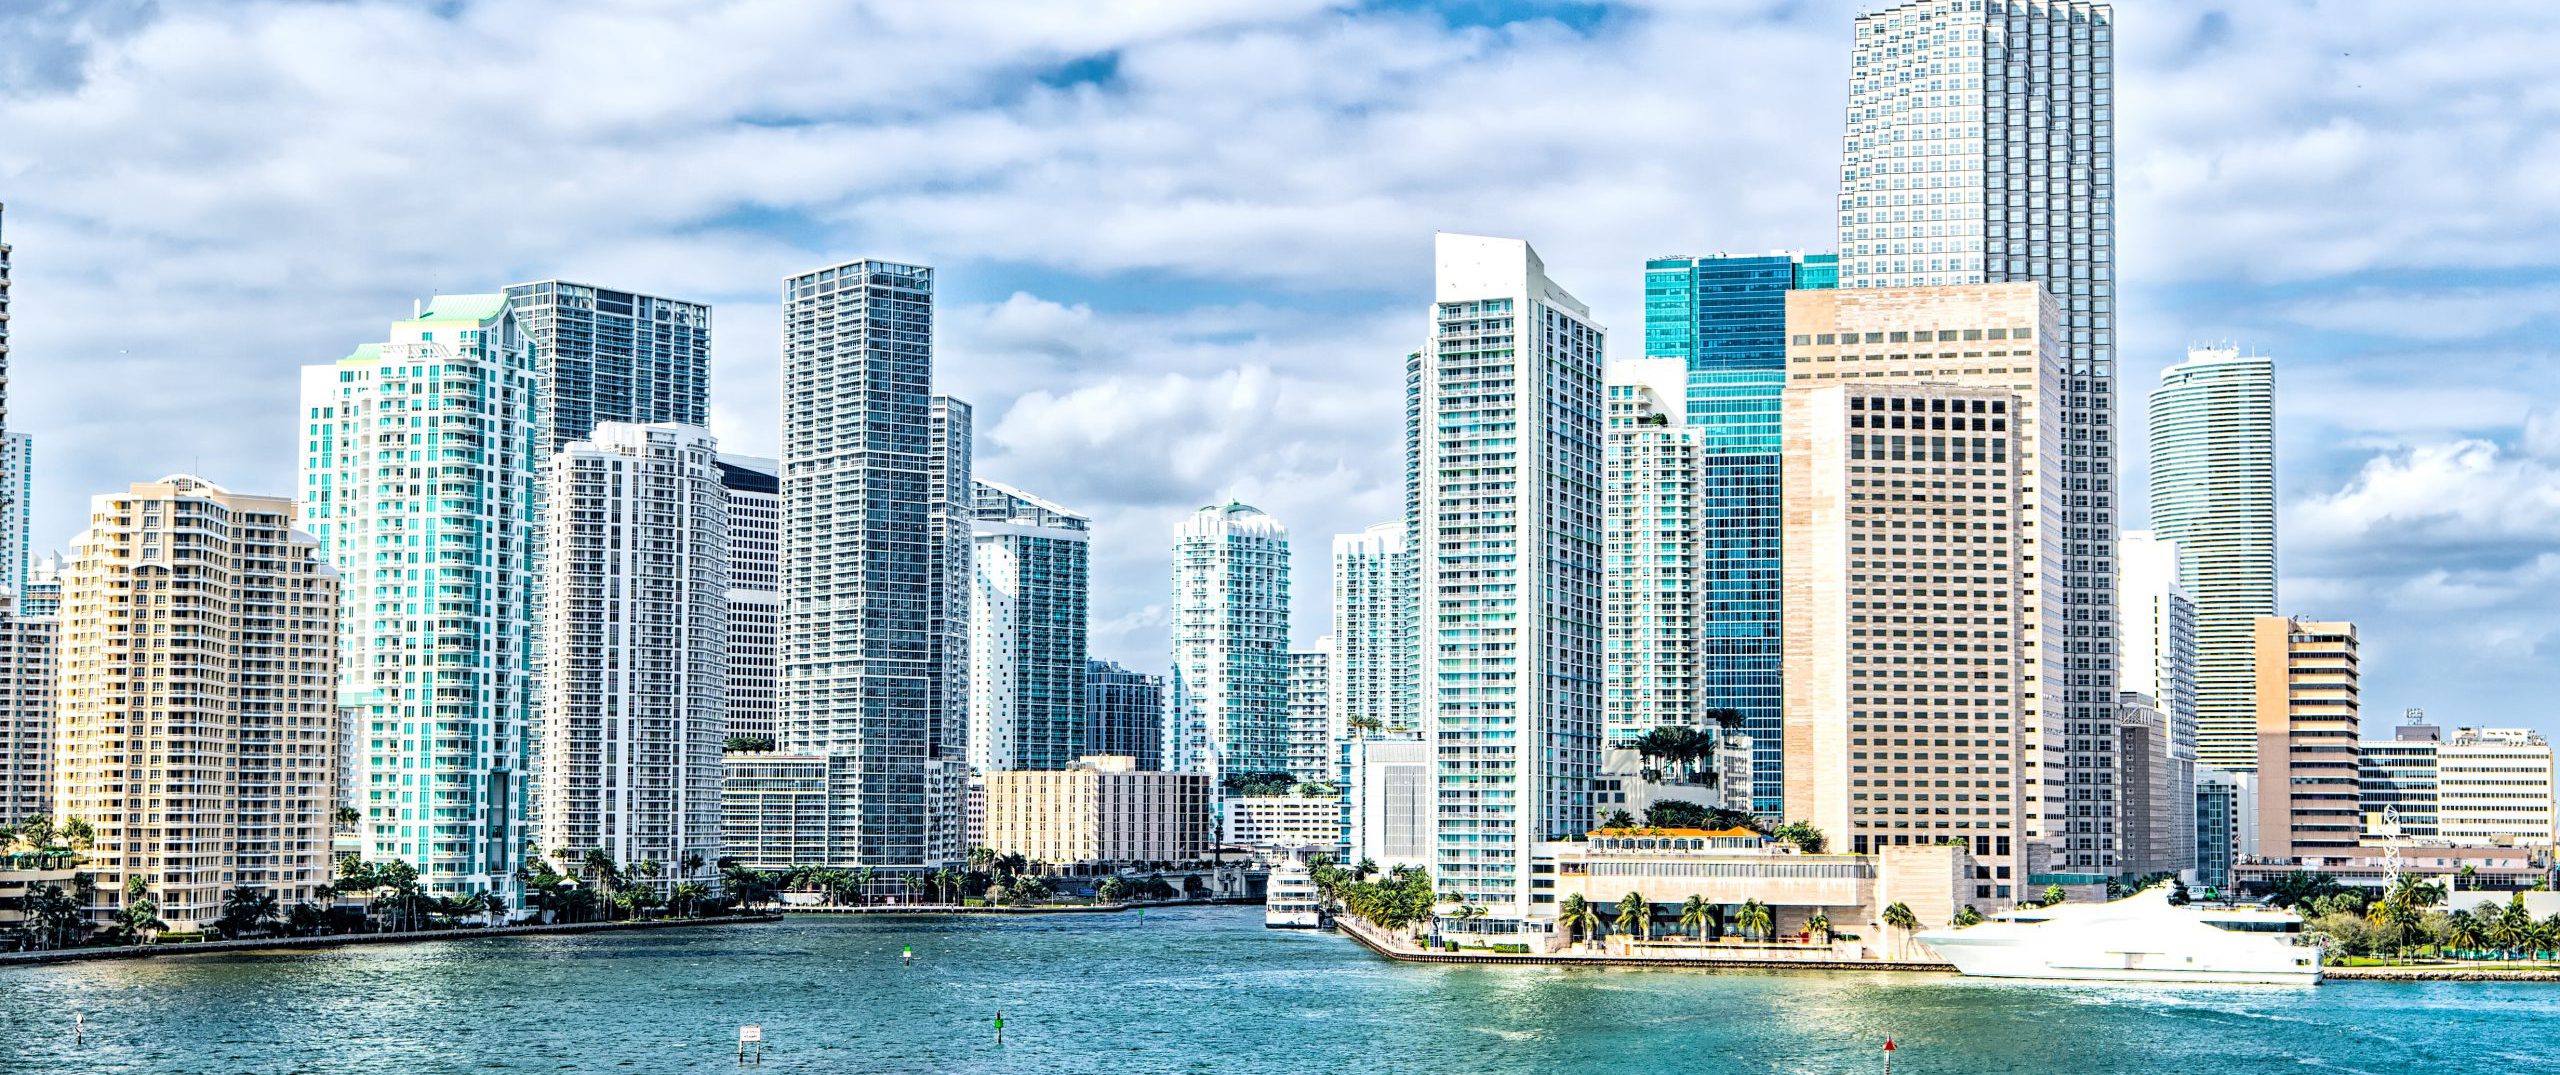 Miami can be seen on a beautiful, sunny afternoon with boats driving around on blue water along the coast.